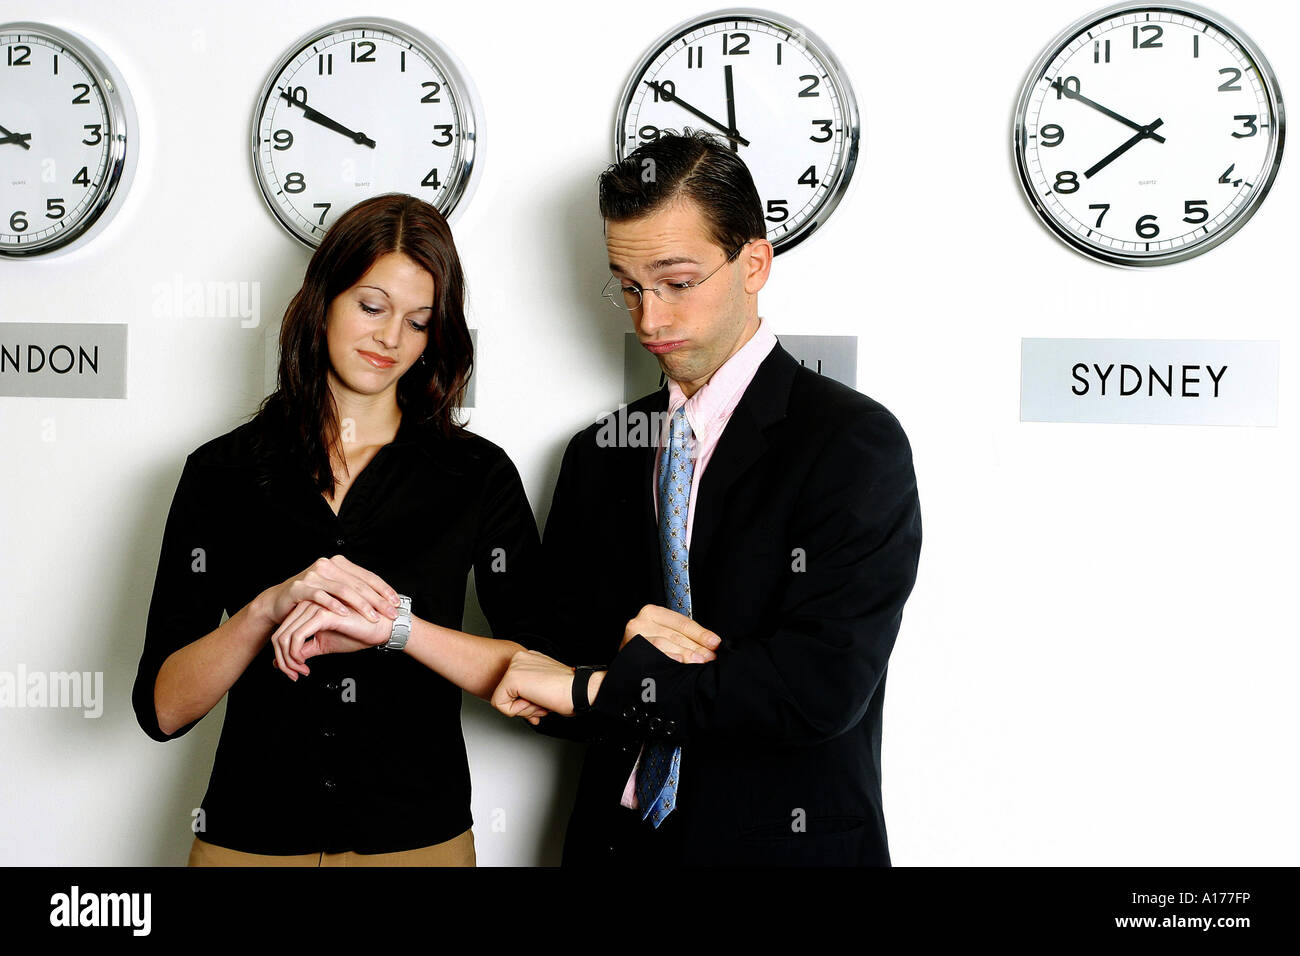 Man and woman in front of different world time clocks Stock Photo